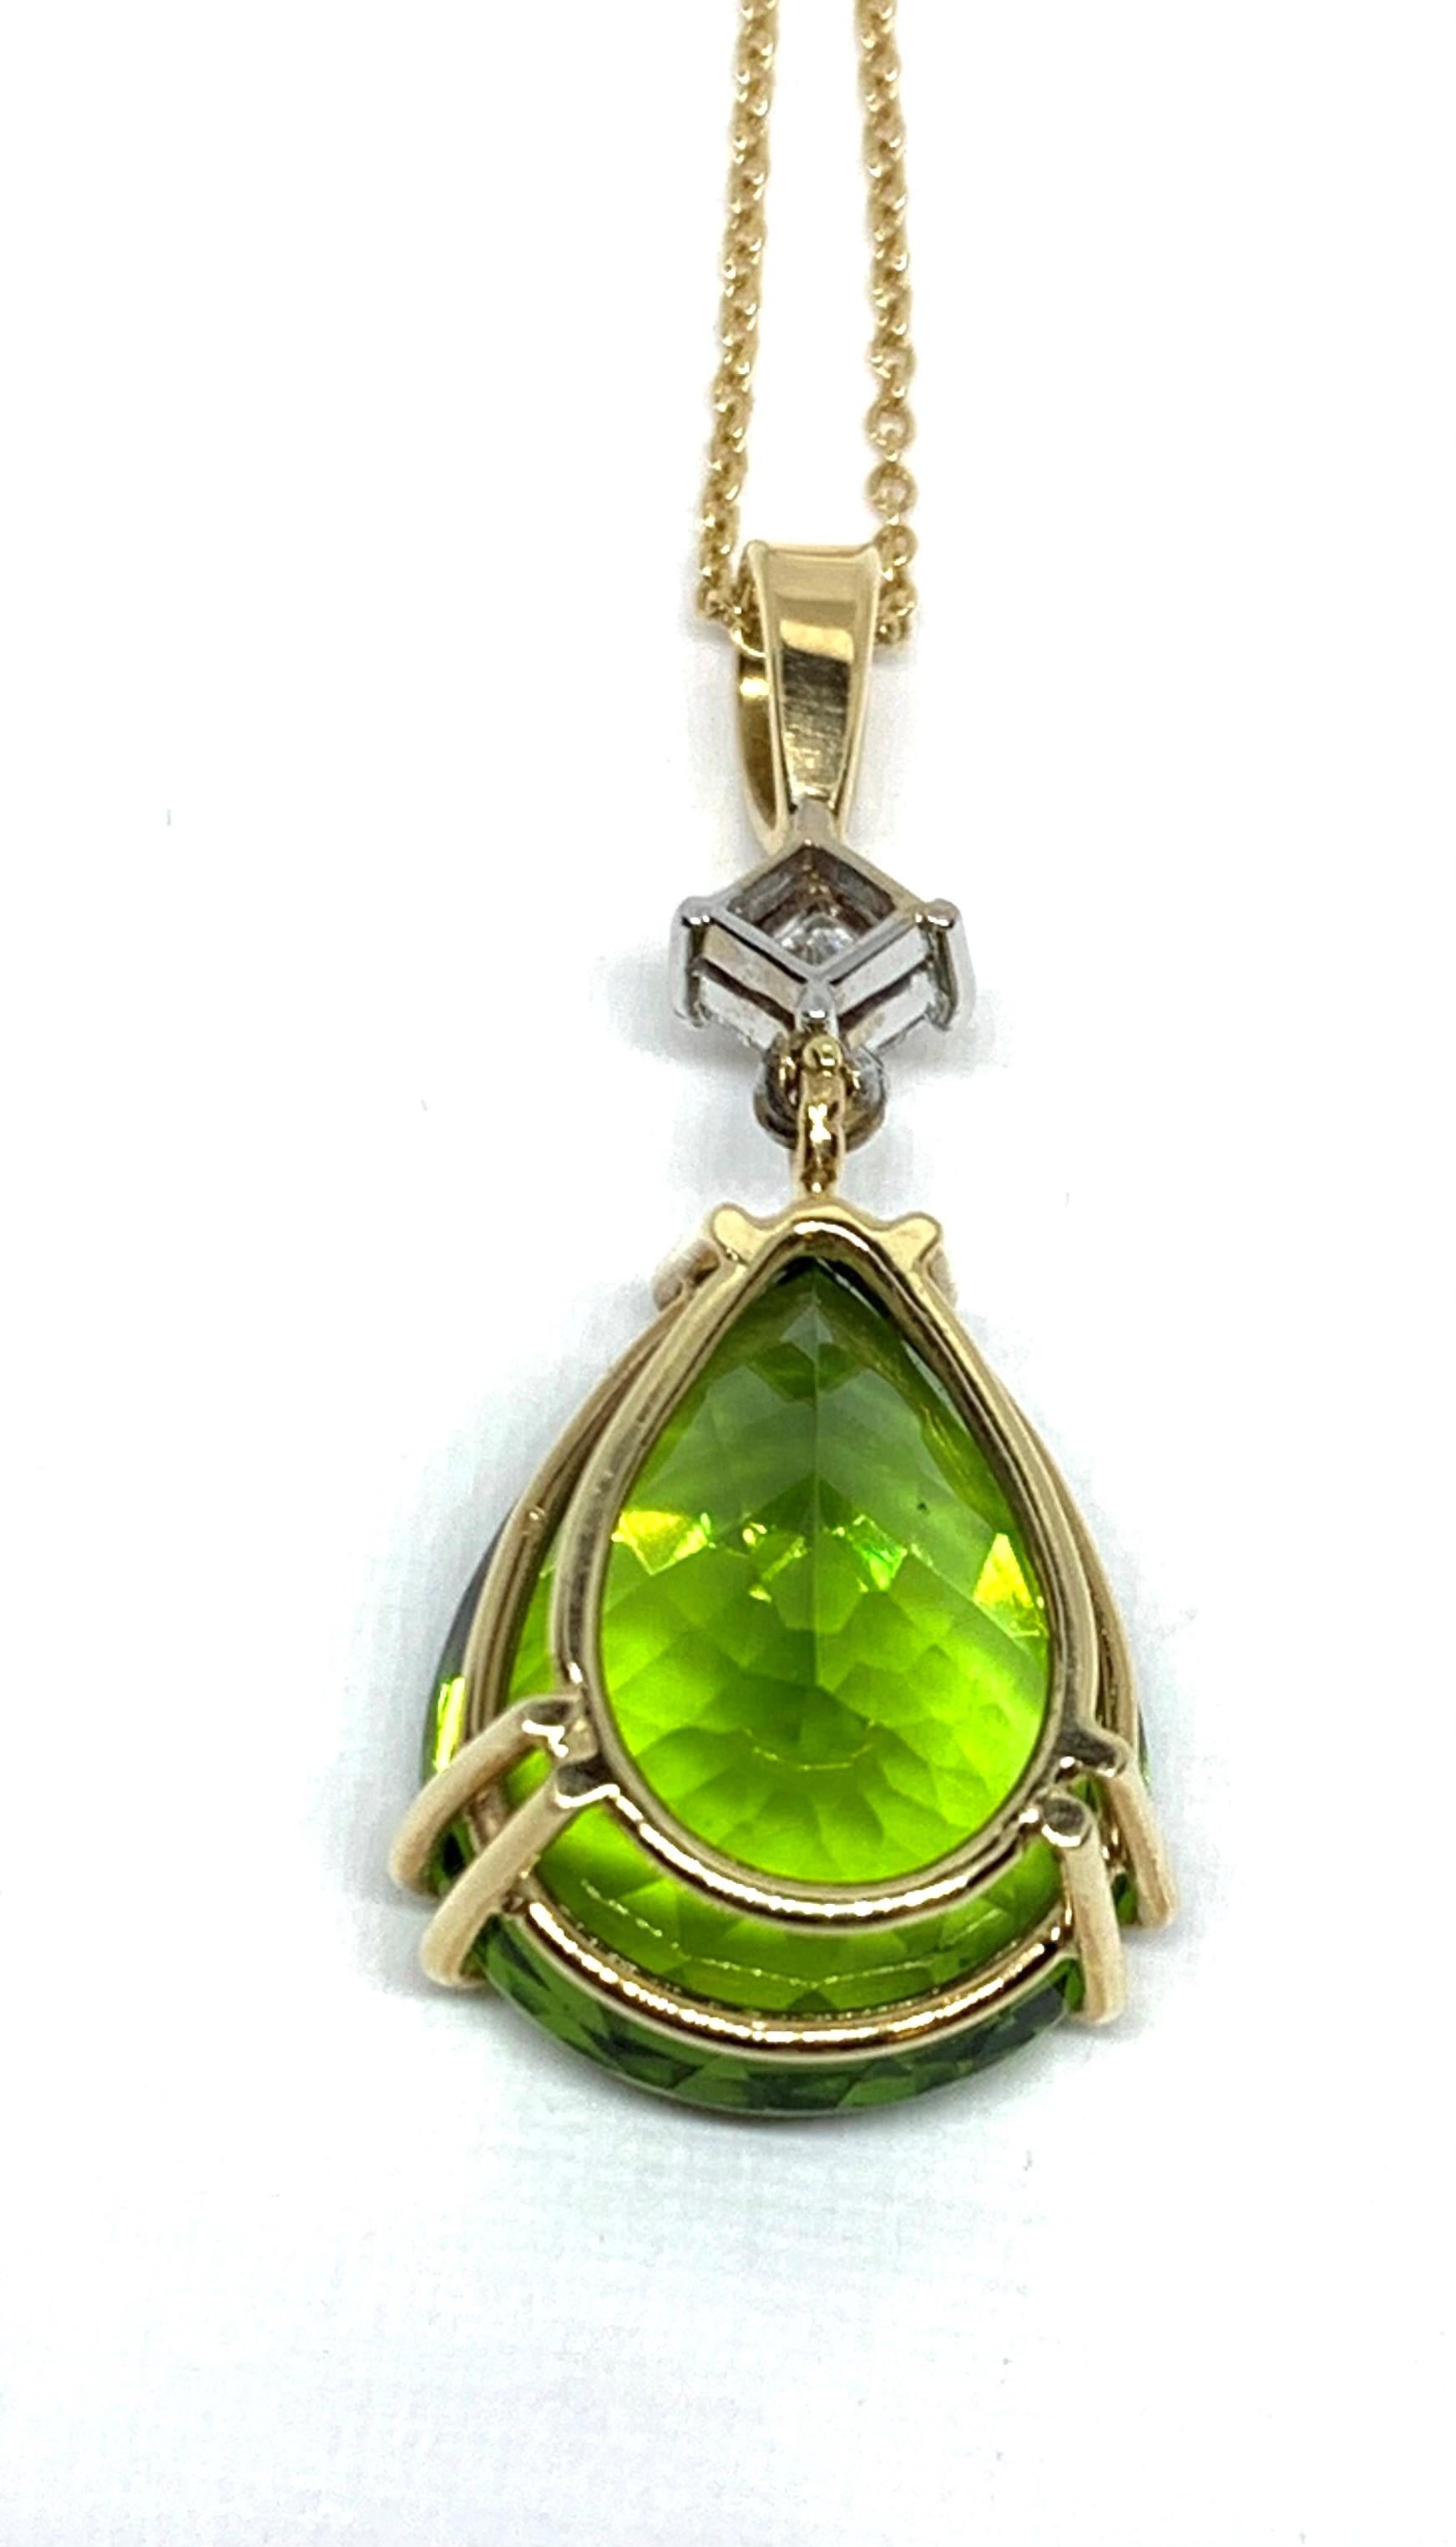 Bold and simply elegant are two adjectives that best describe this pretty pendant.  A velvety, key lime-green peridot is the perfect addition to any jewelry lover's collection, as the color compliments all colors of clothing. This impressive 14.96